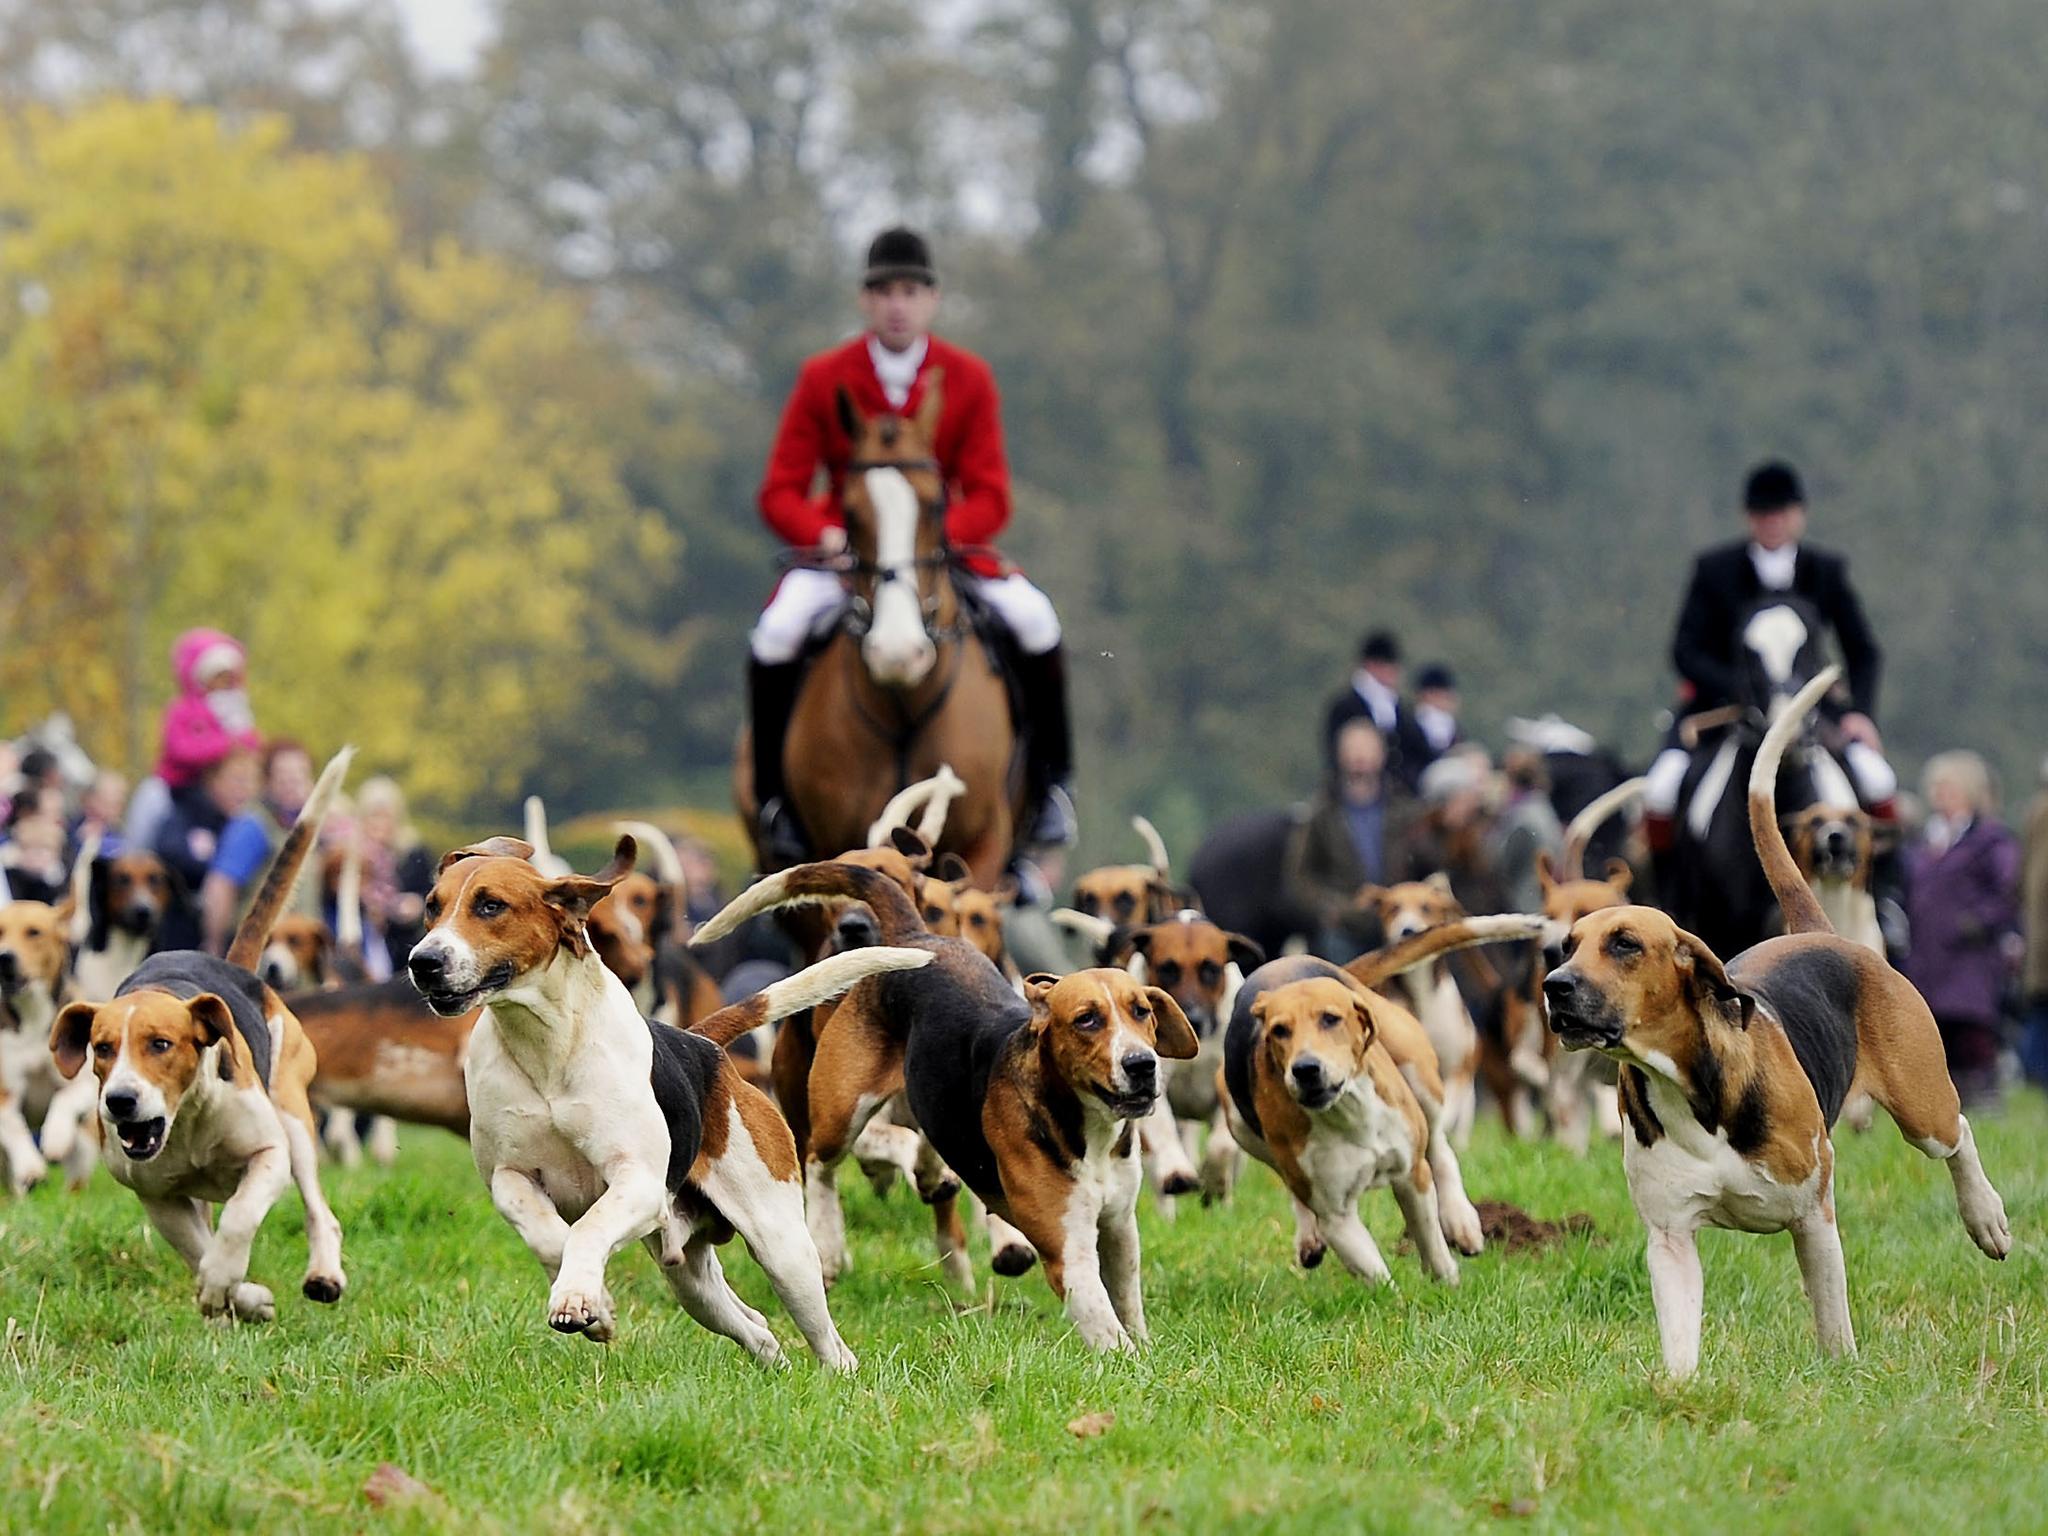 Labour quietly targeting Tories over fox hunting with Facebook ad campaign